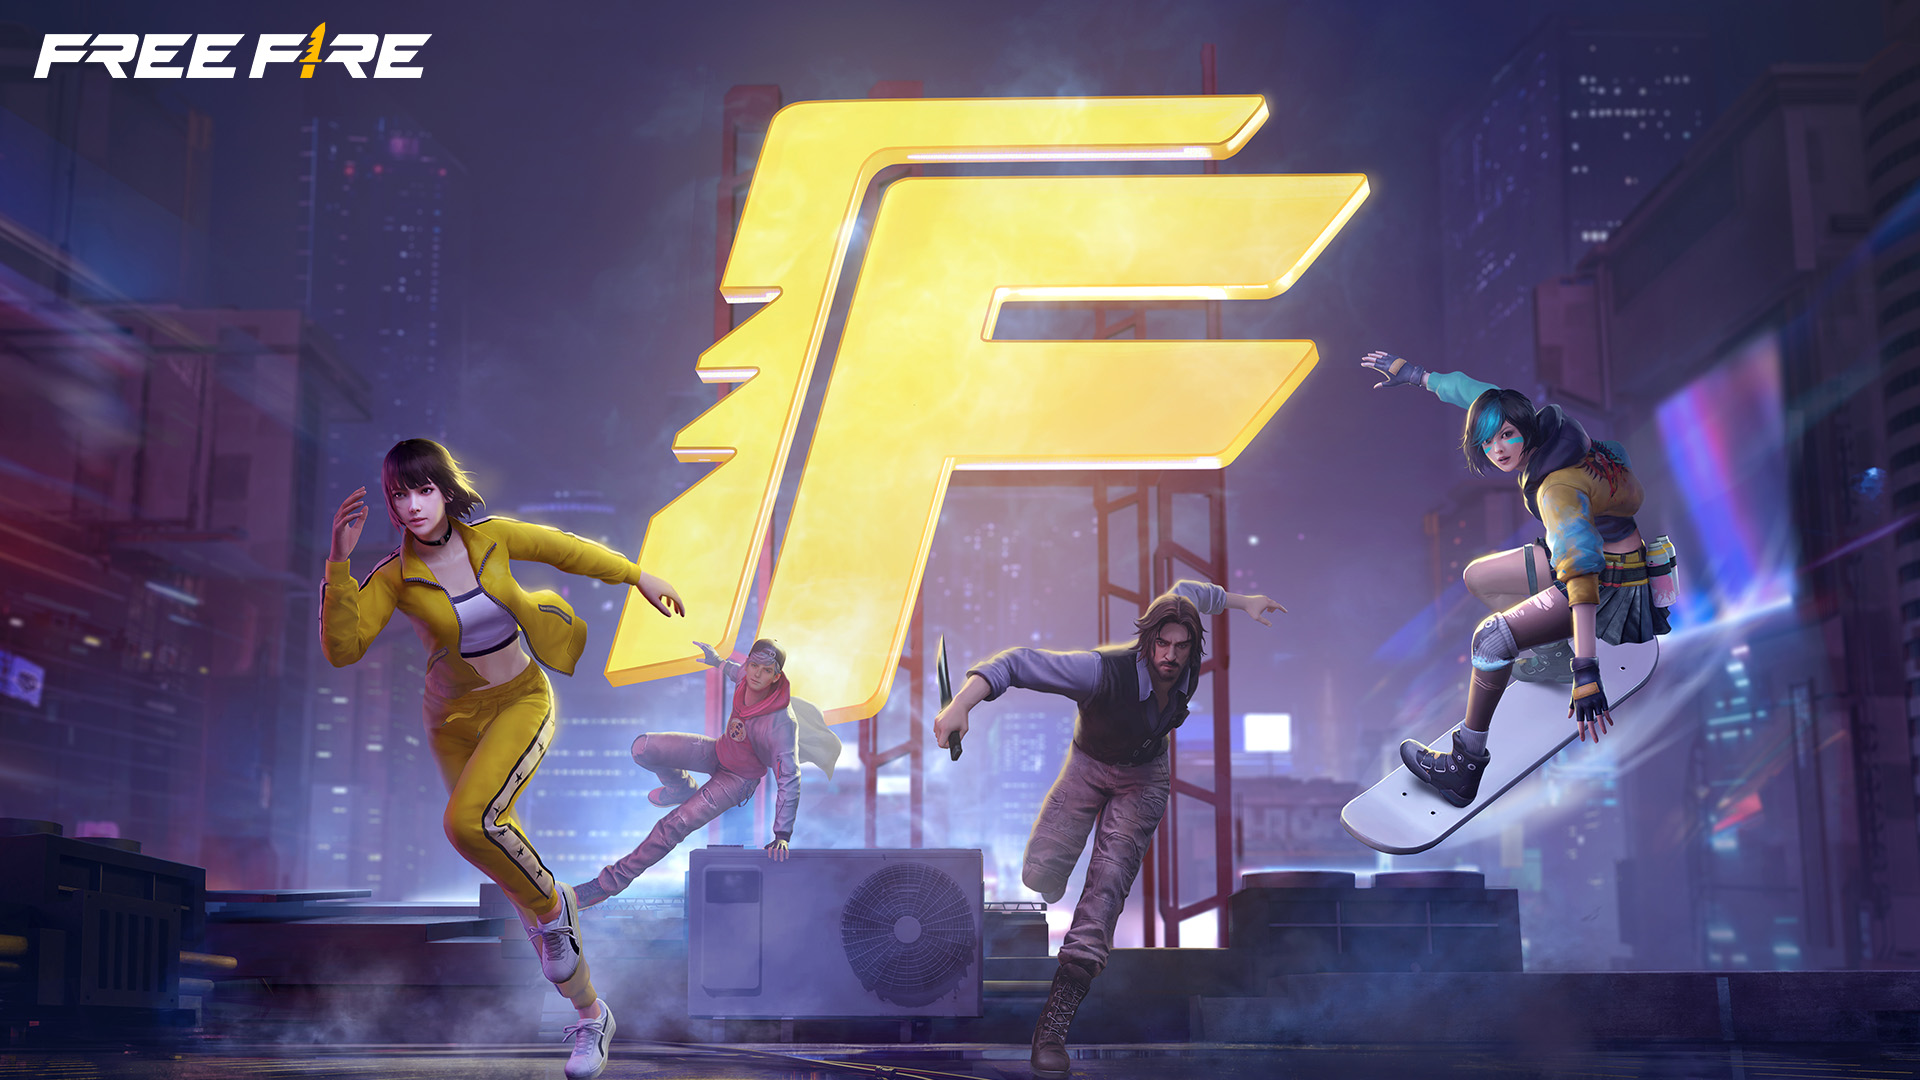 Garena Free Fire MAX Redeem Codes May 21 feature FREE rewards such as Bundles, skins, and more and check how to redeem the codes successfully.